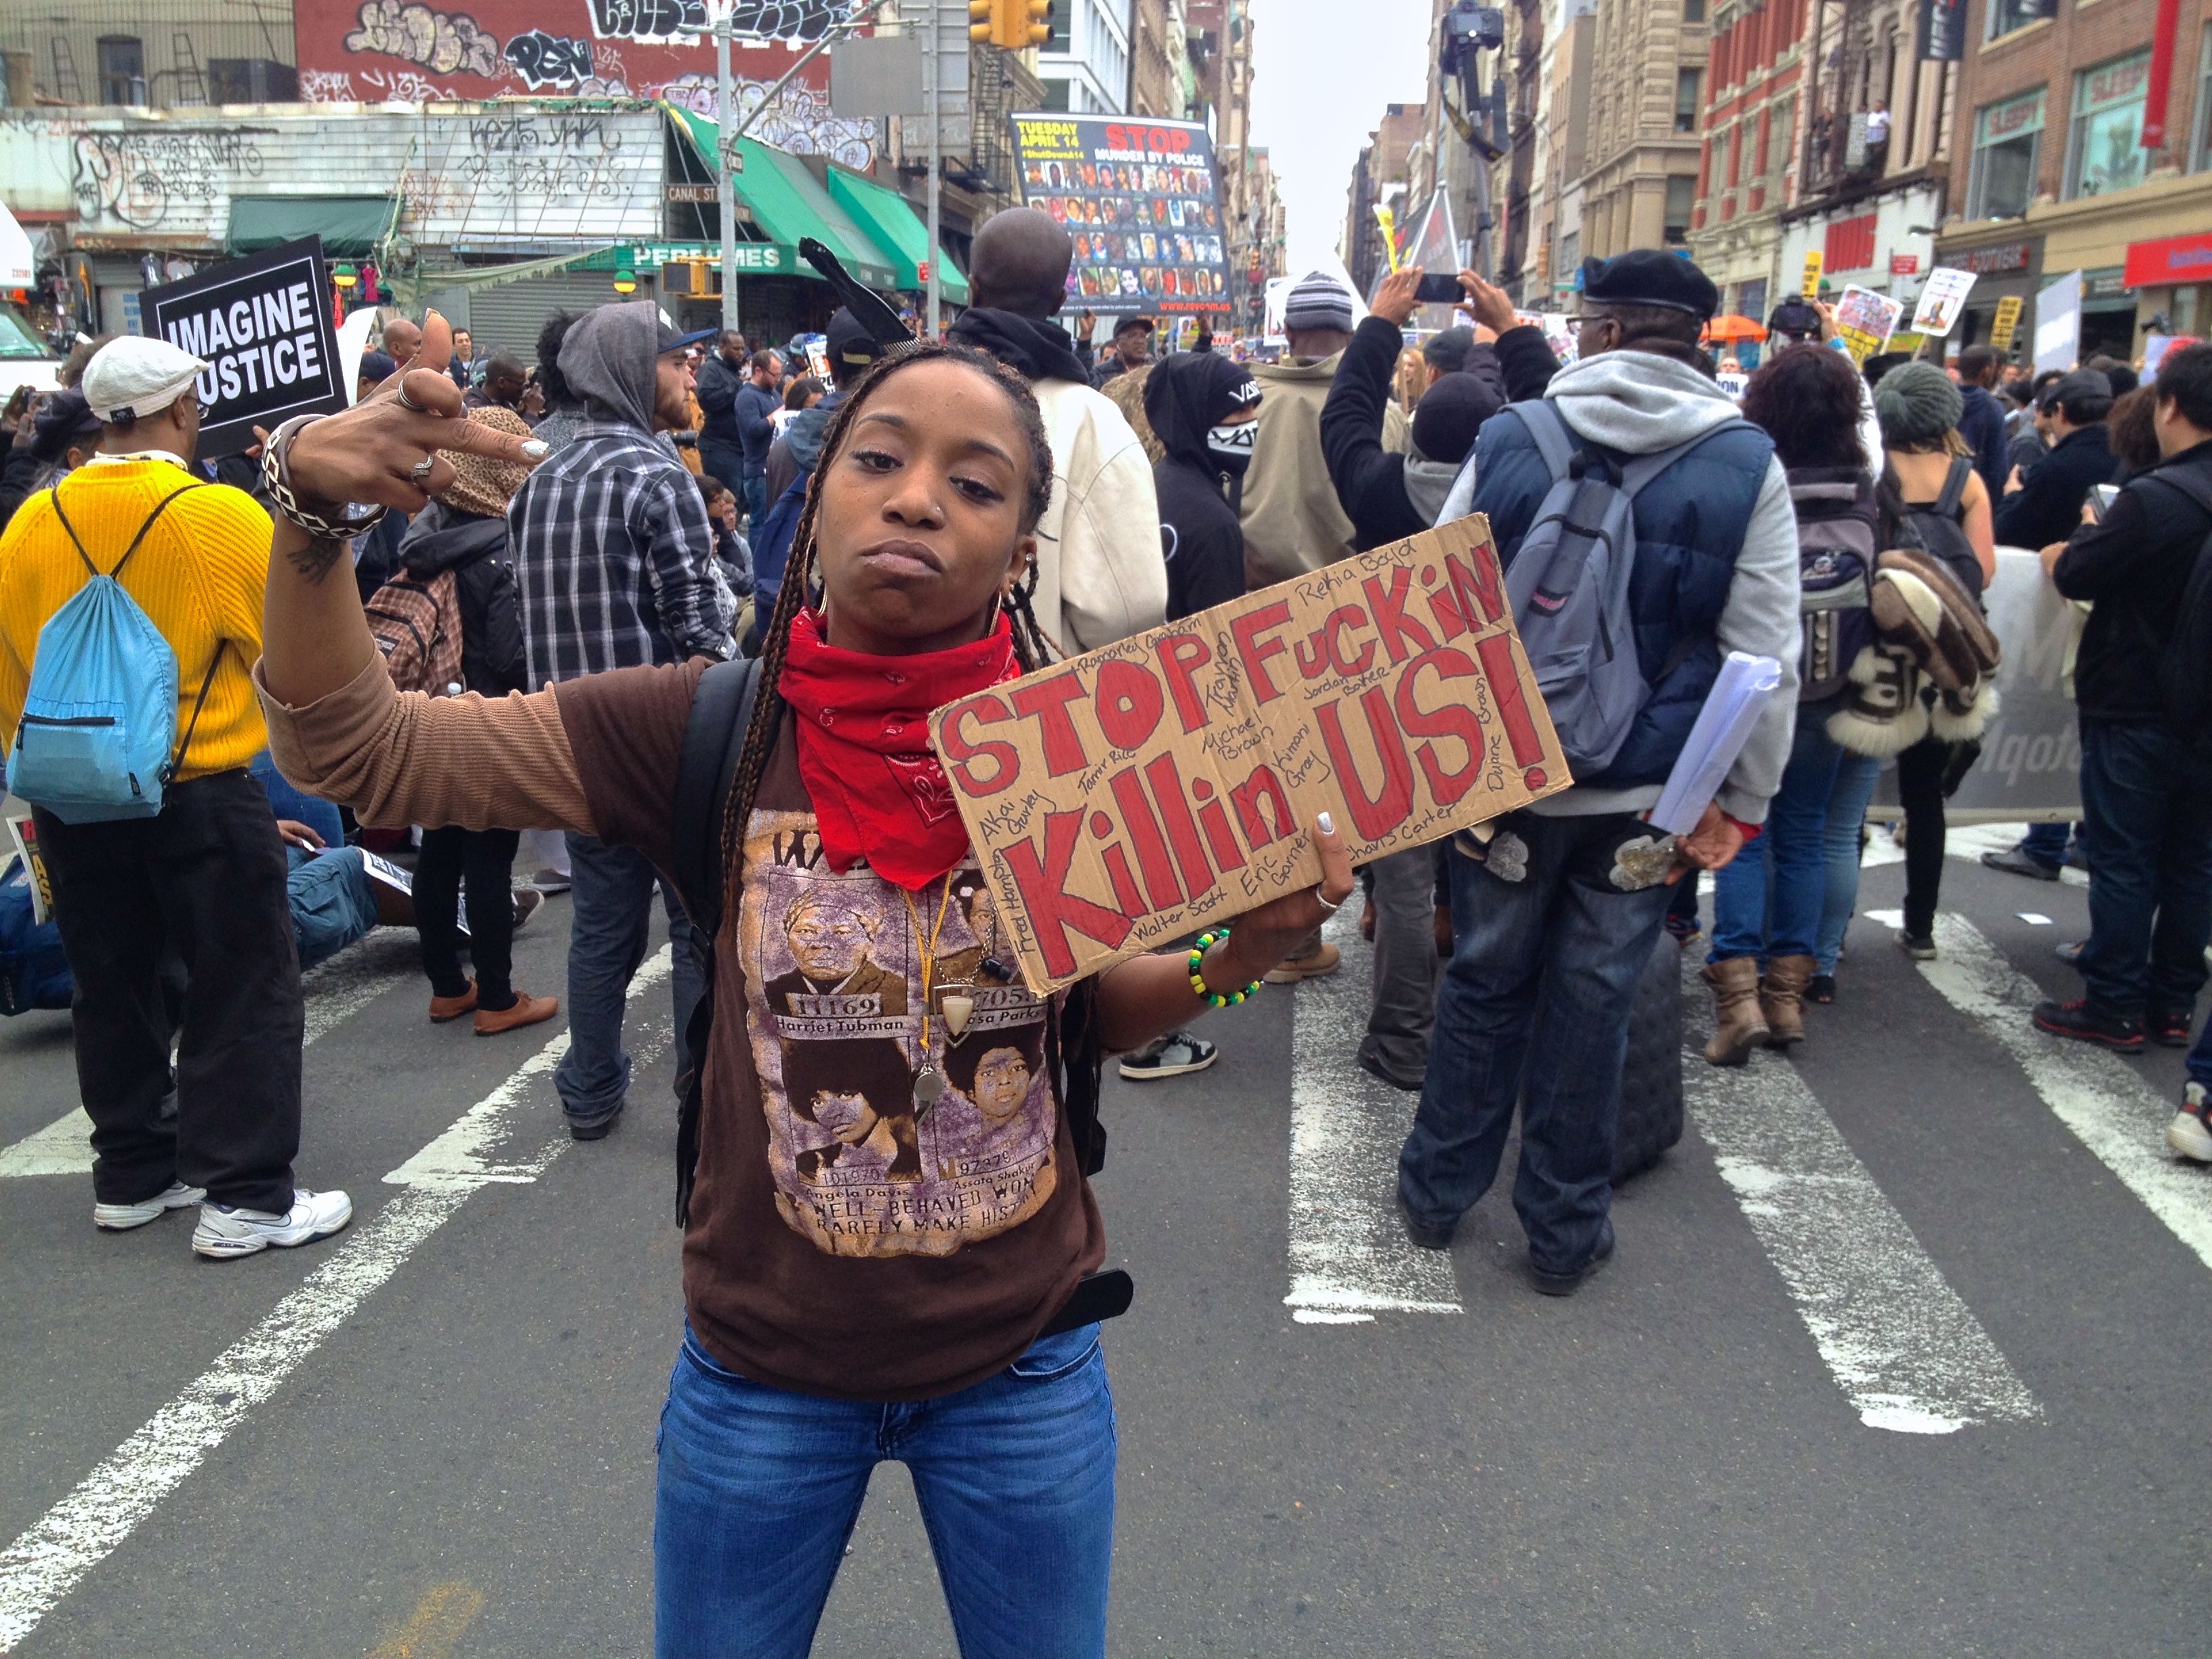 A woman protesting against police brutality on April 14, 2015.